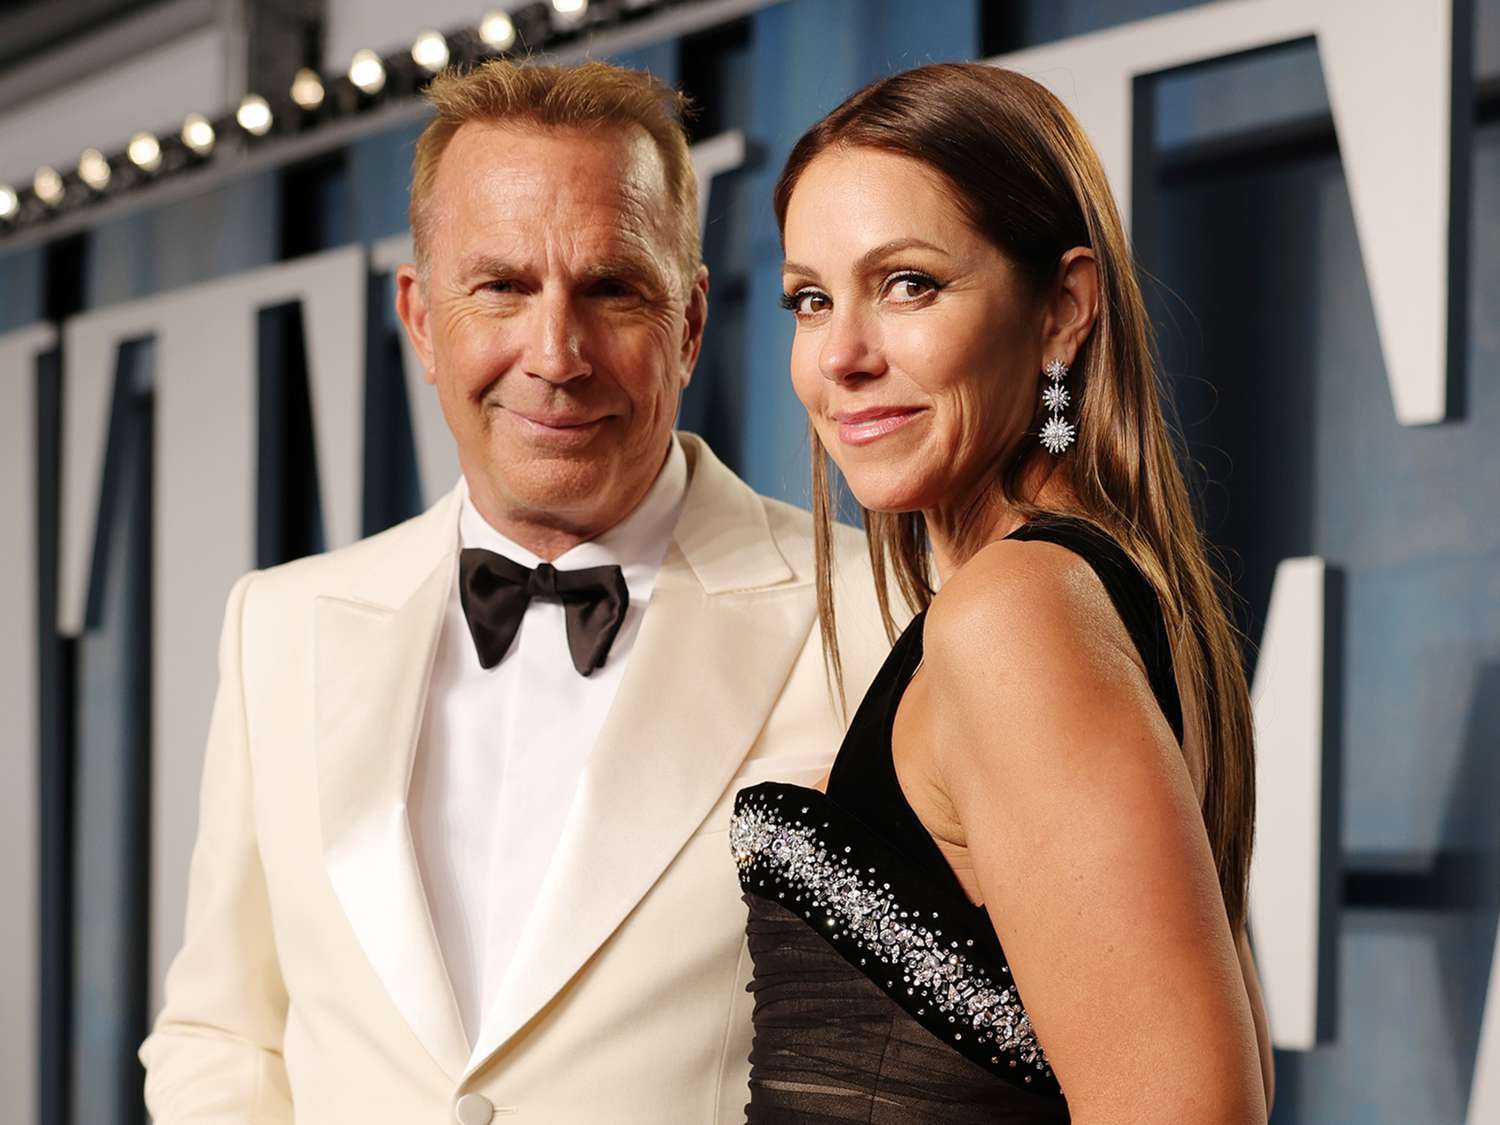 Costner and Baumgartner Divorce: A Contentious Breakup Fueled by Infidelity Rumors and Property Dispute. 15